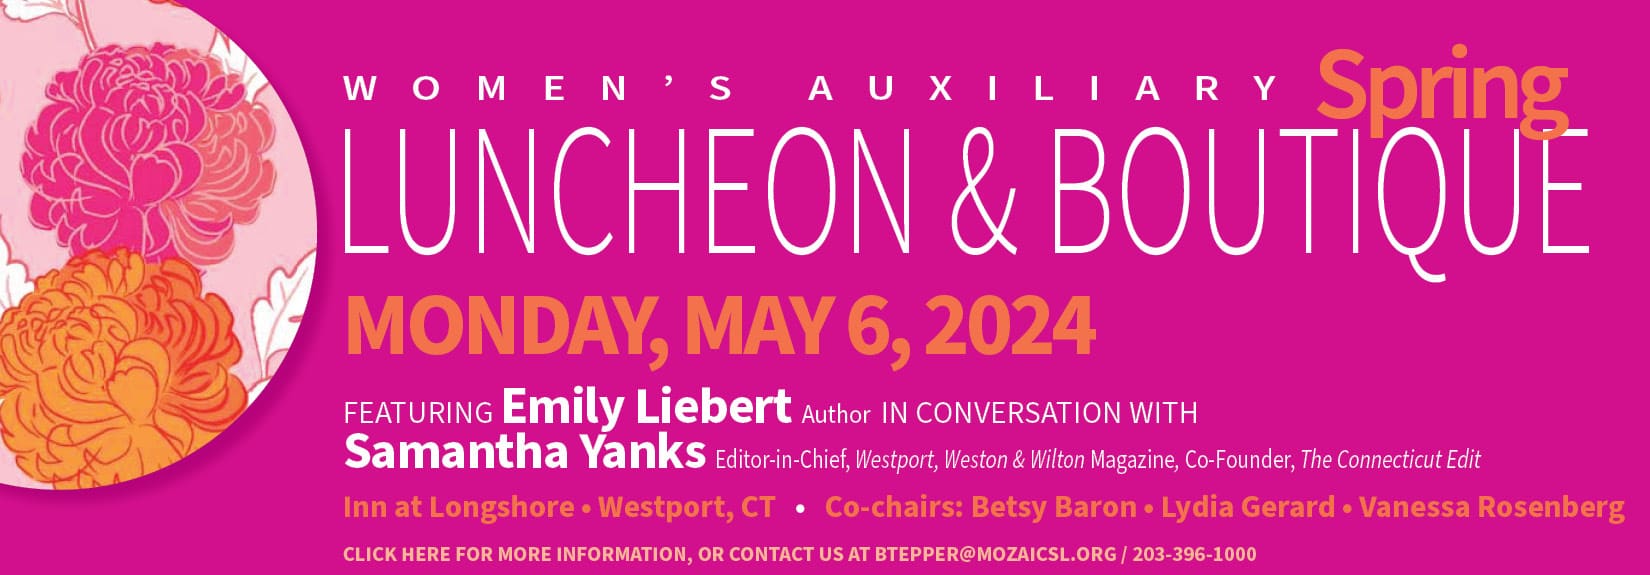 Luncheon and boutique event on May 6, 2024.